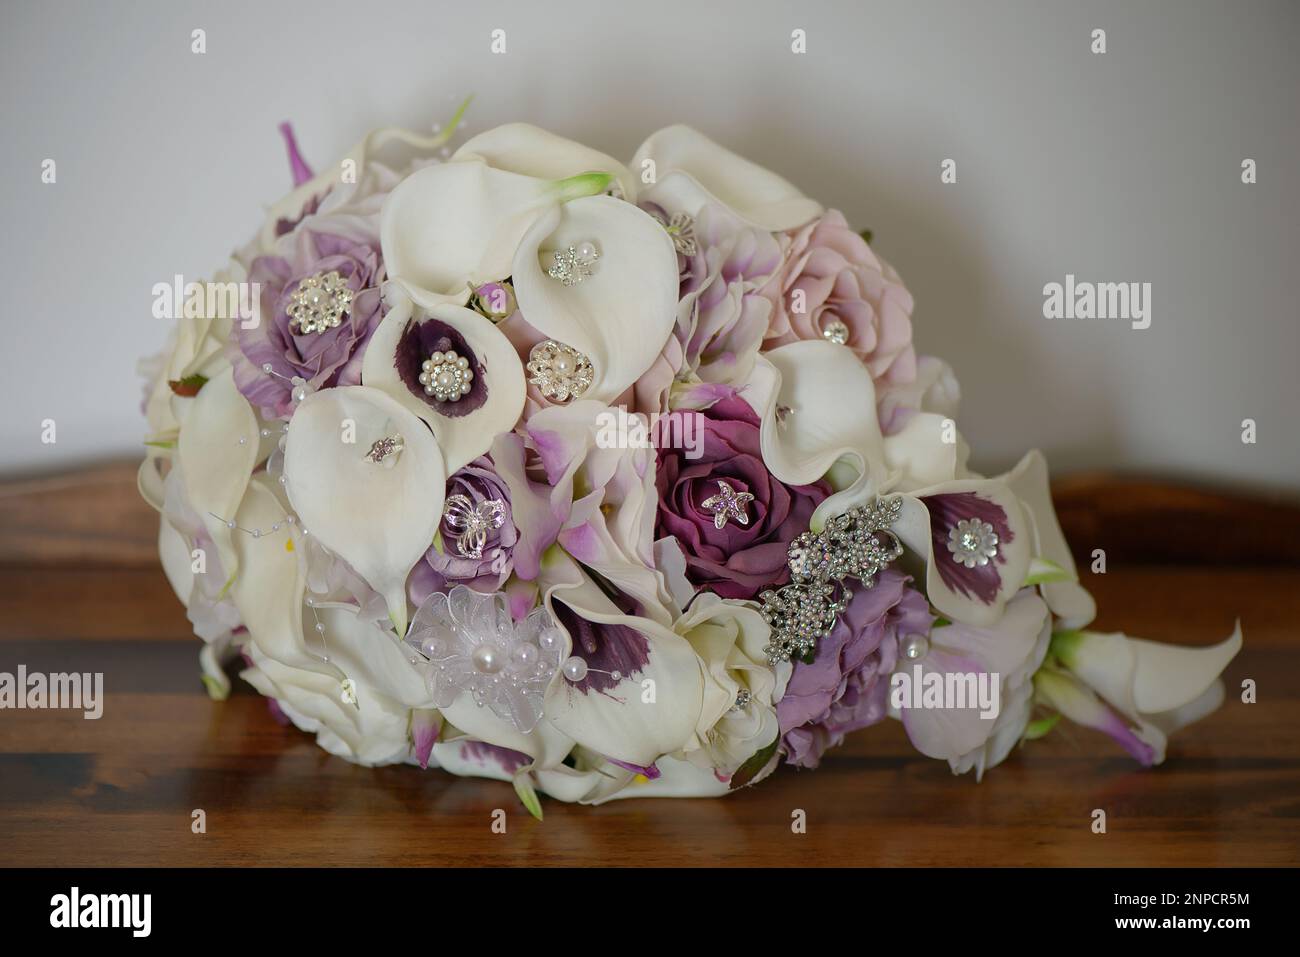 Cascading wedding bouquet with calla lilies, purple roses, decorated with silver jewelry, silk and pearl beads rested on a wooden table Stock Photo